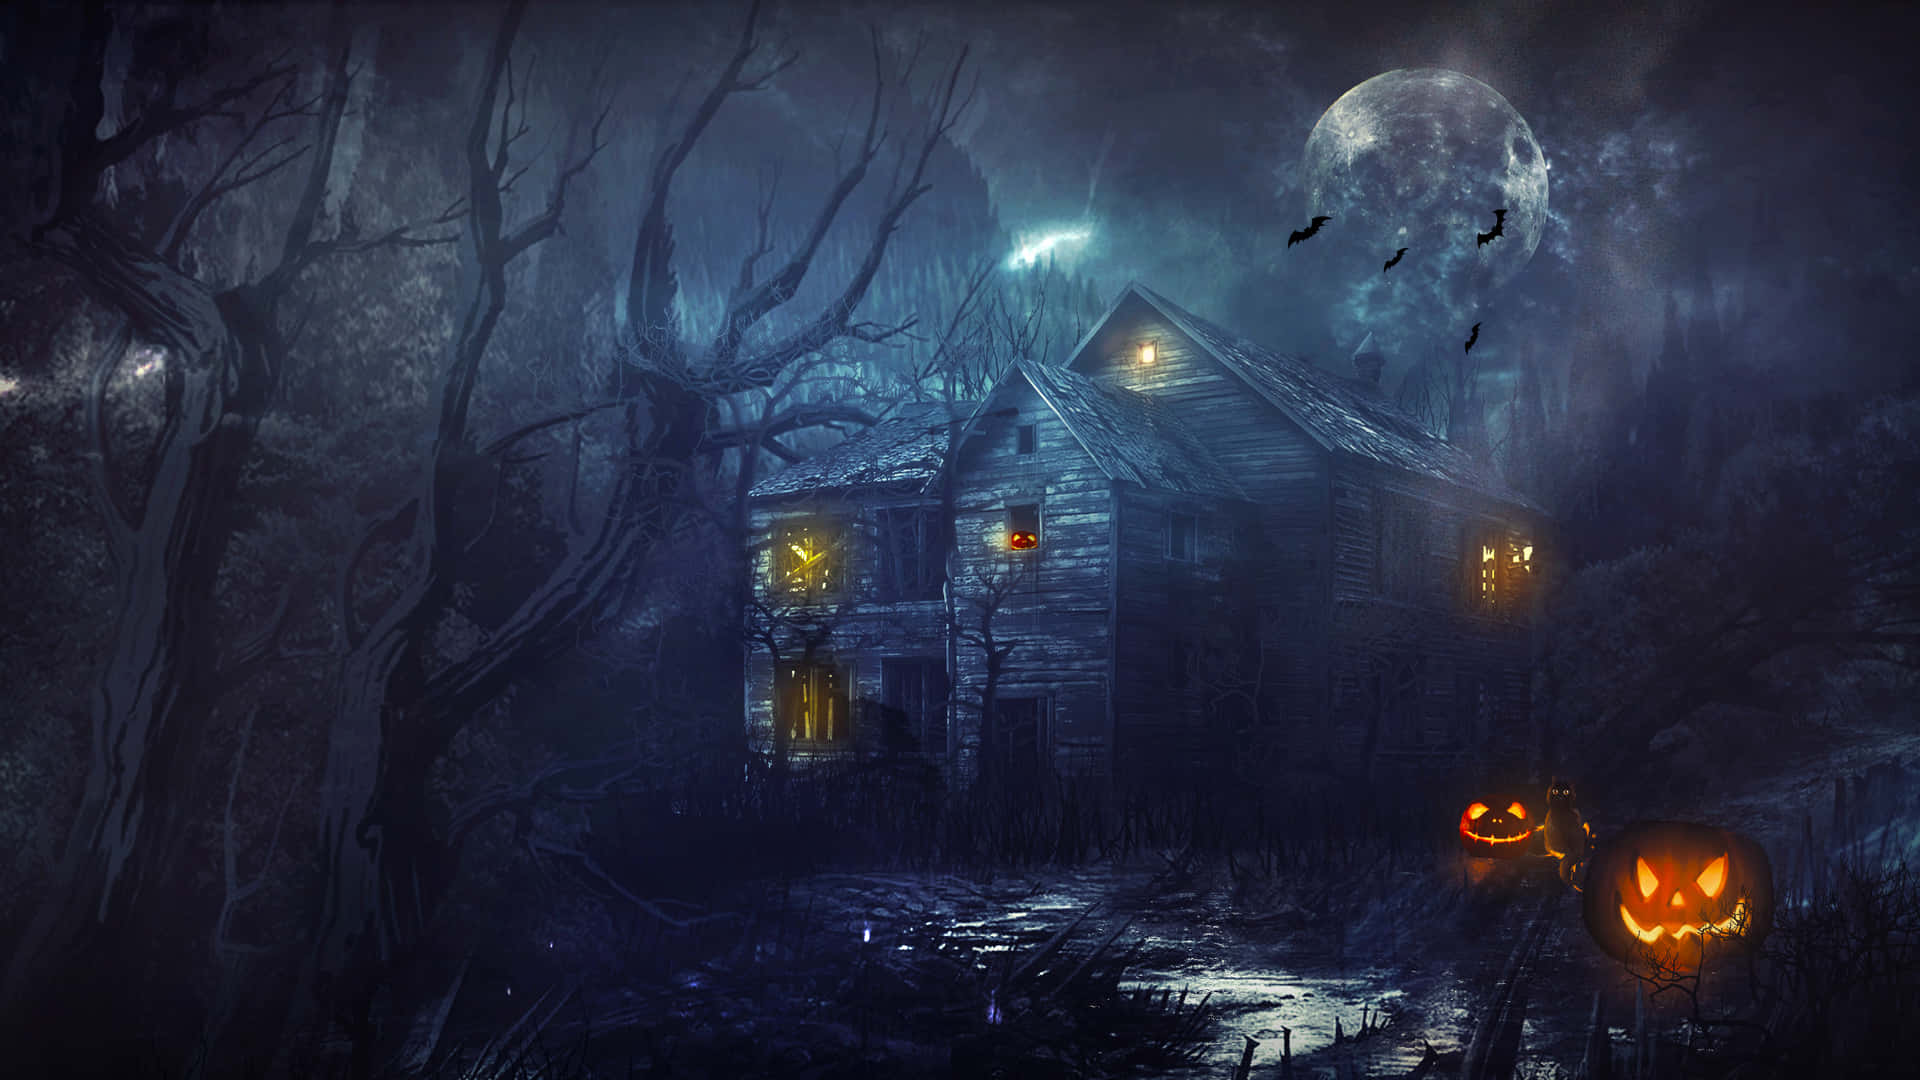 Frightful and Fascinating - A Haunted House at Night